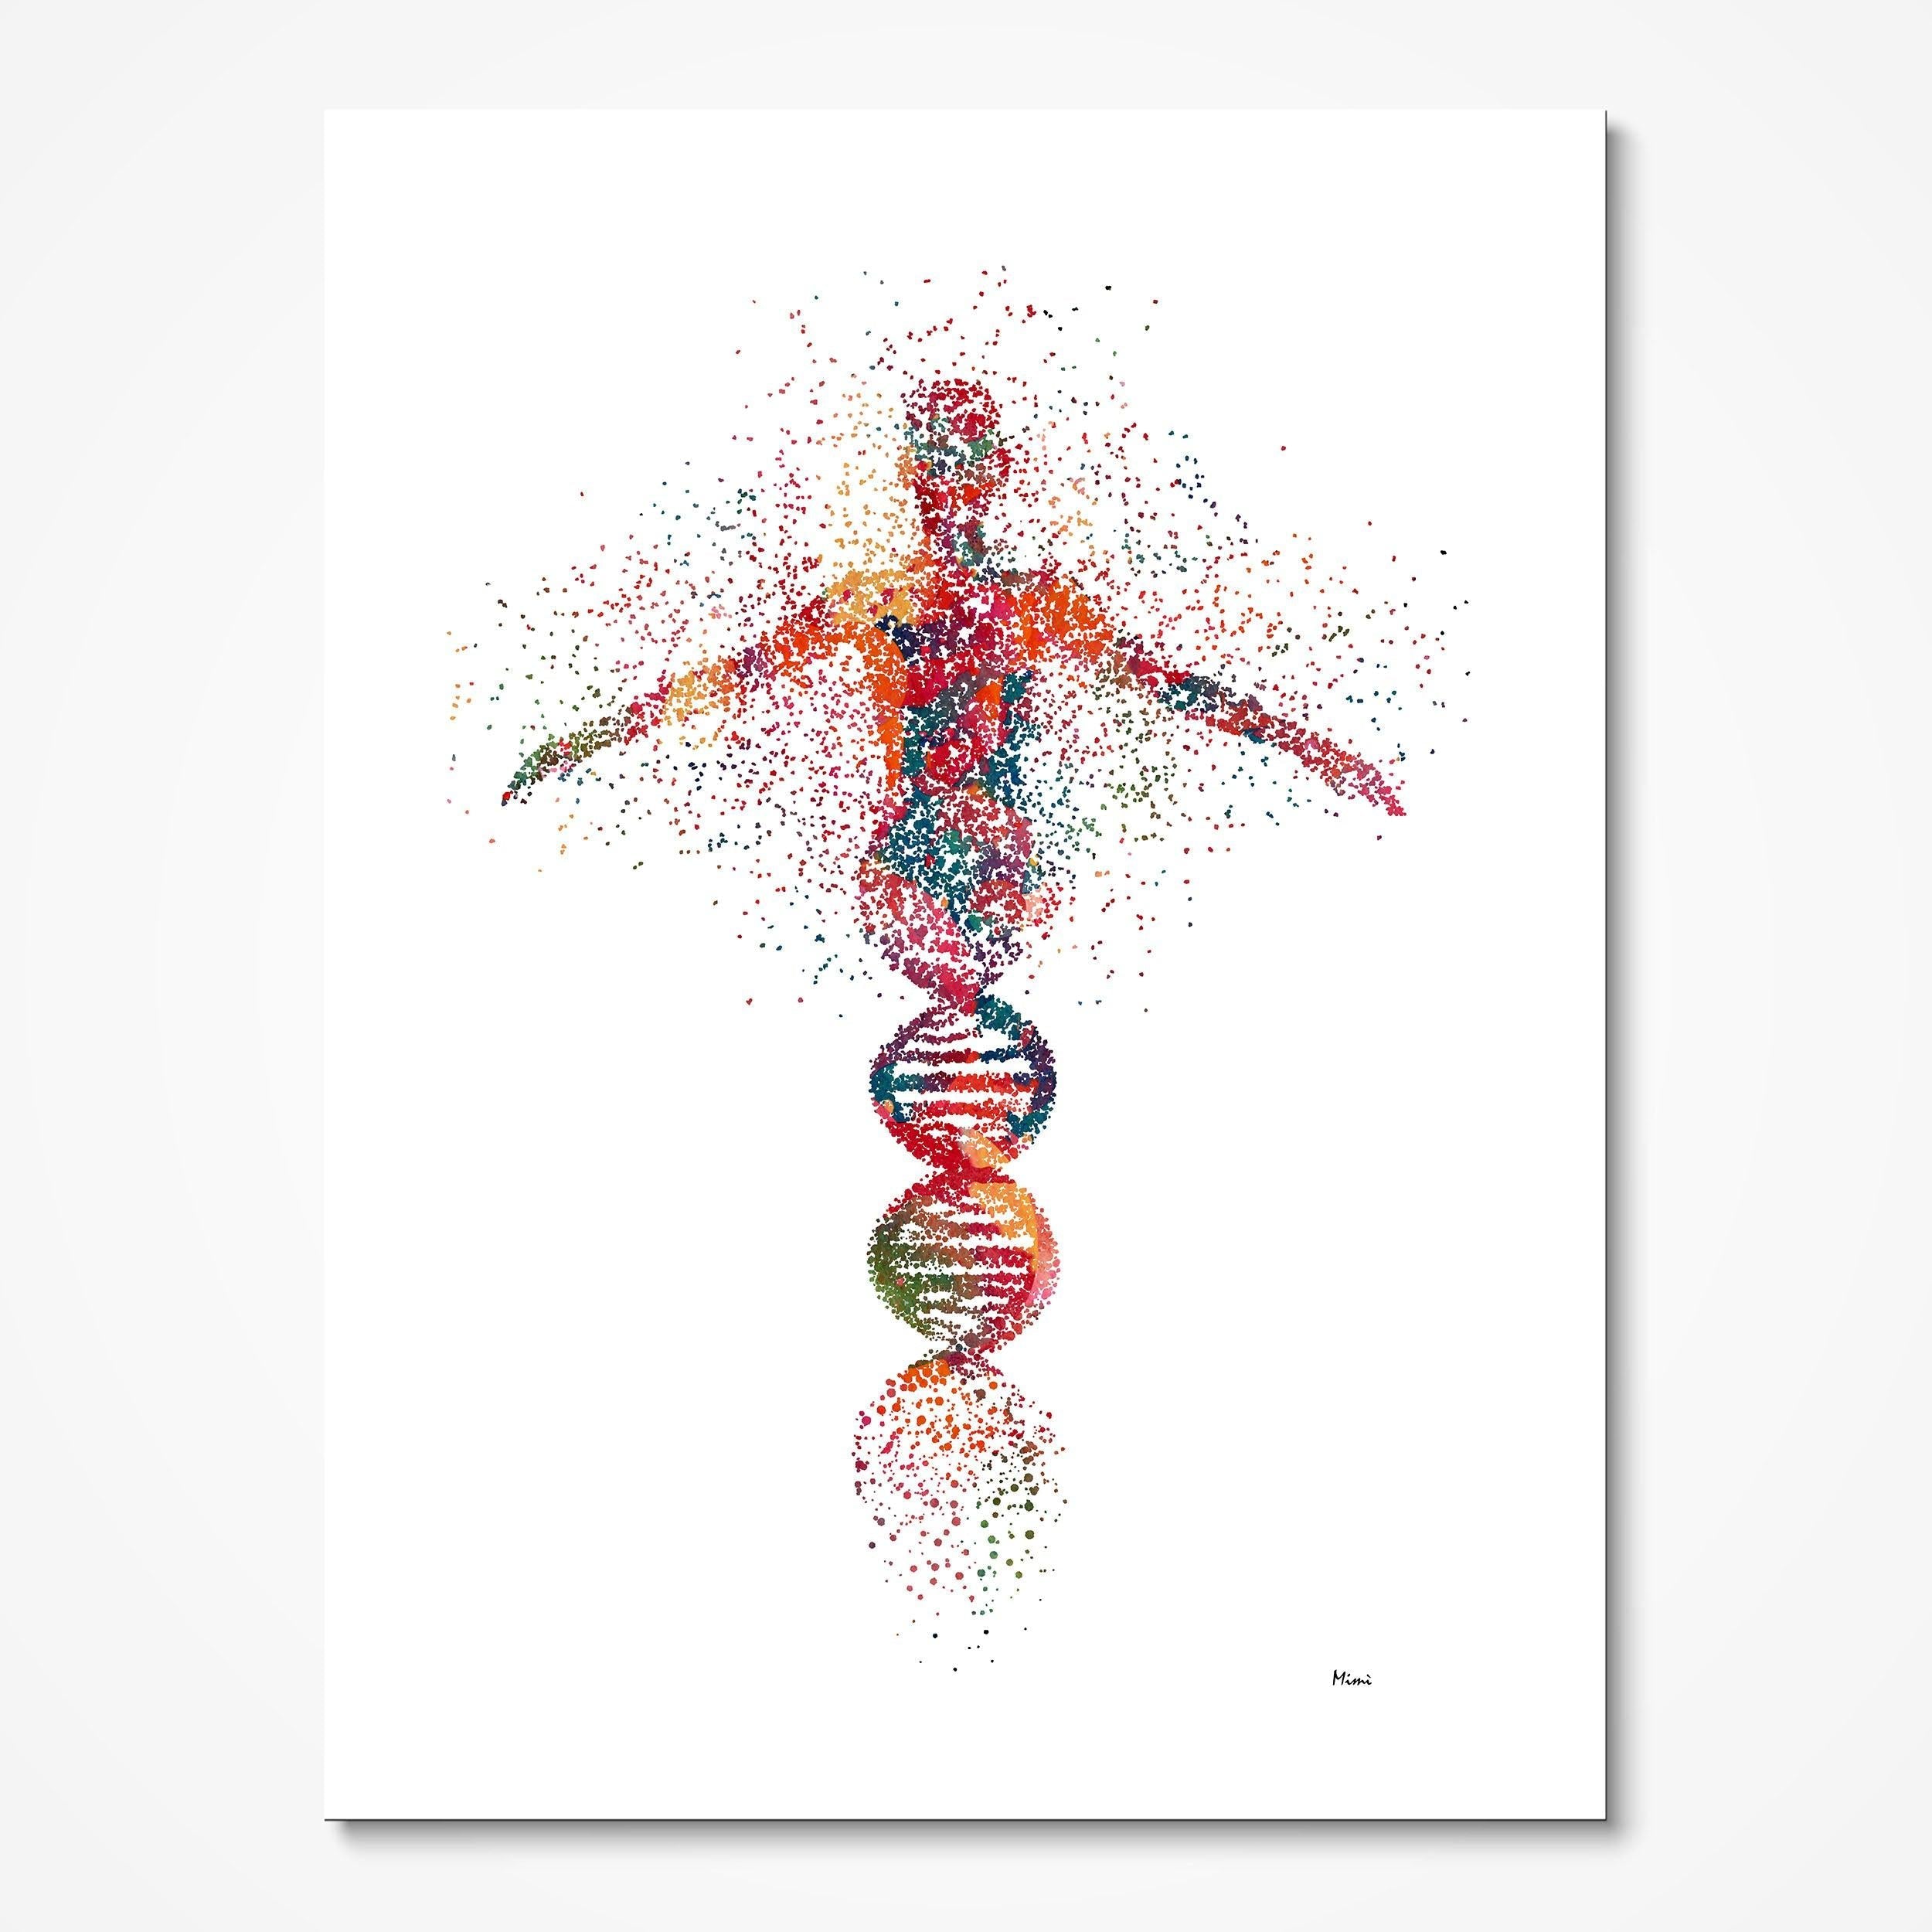 DNA Woman Abstract Science Art Print. Poster Of A Female Body Made From DNA Molecules